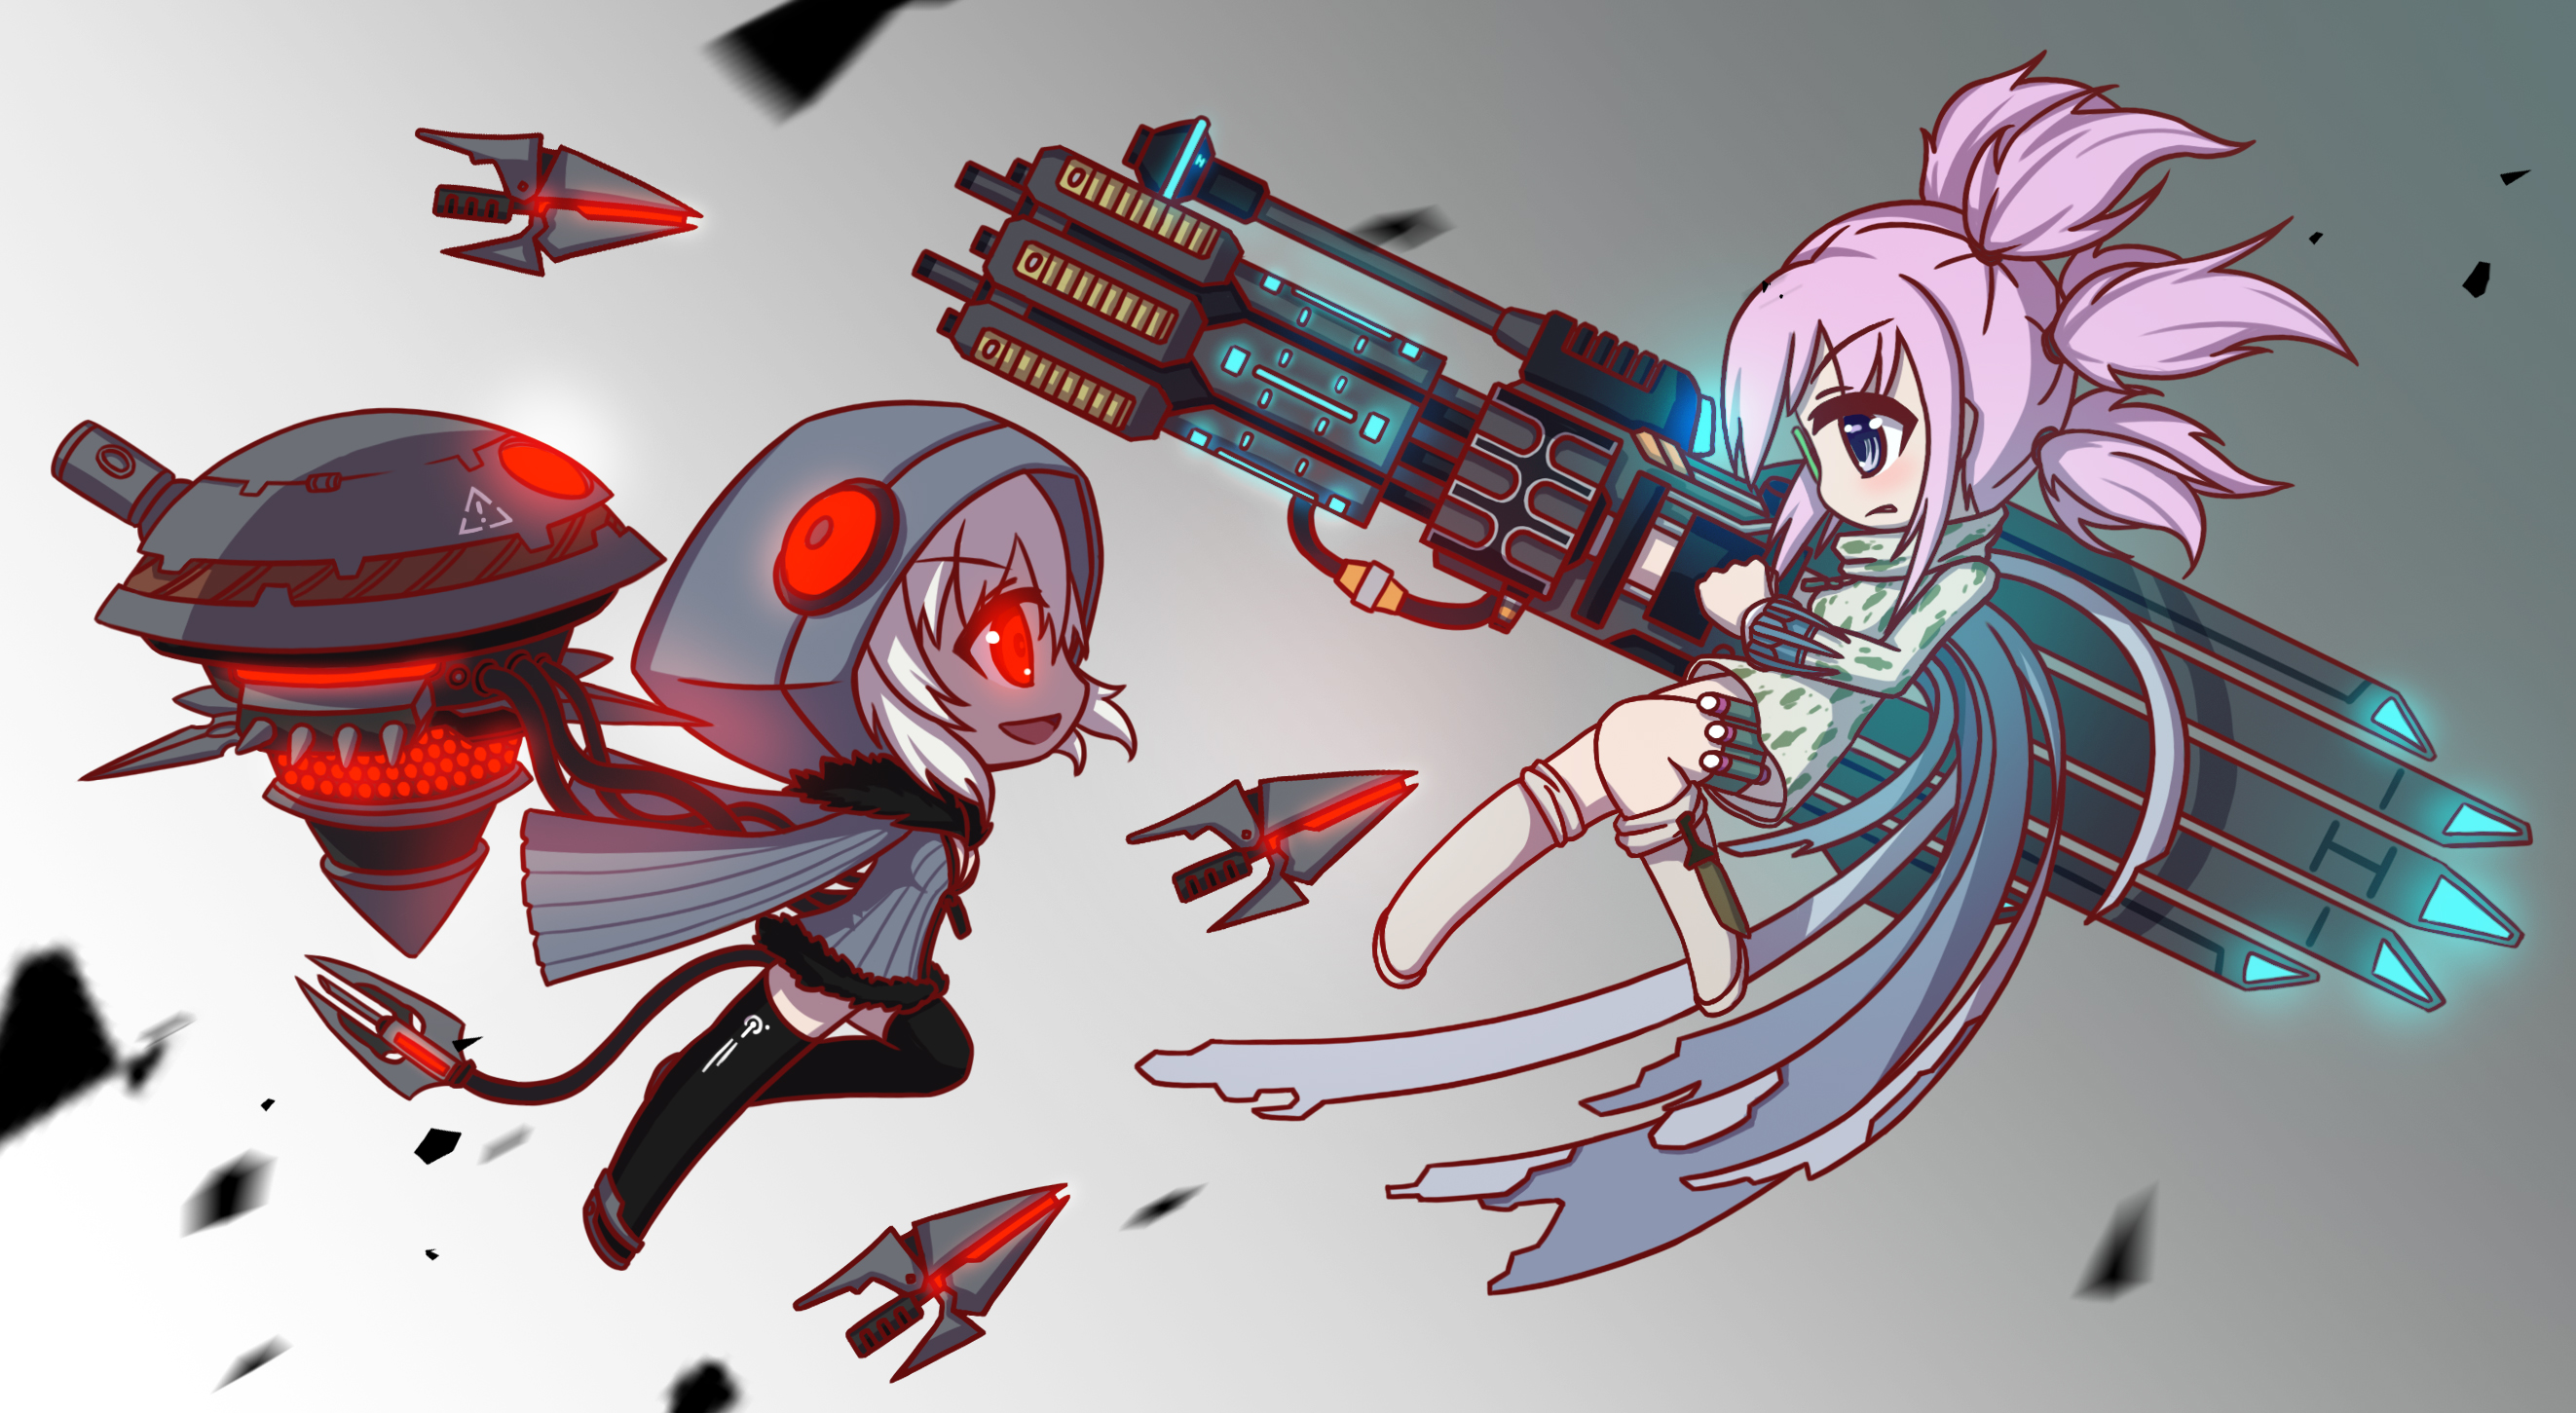 General 2645x1451 Mental Omega video games red alert 2 Command & Conquer video game art video game characters chibi video game girls Libra(Mental Omega) Yunru(Mental Omega)